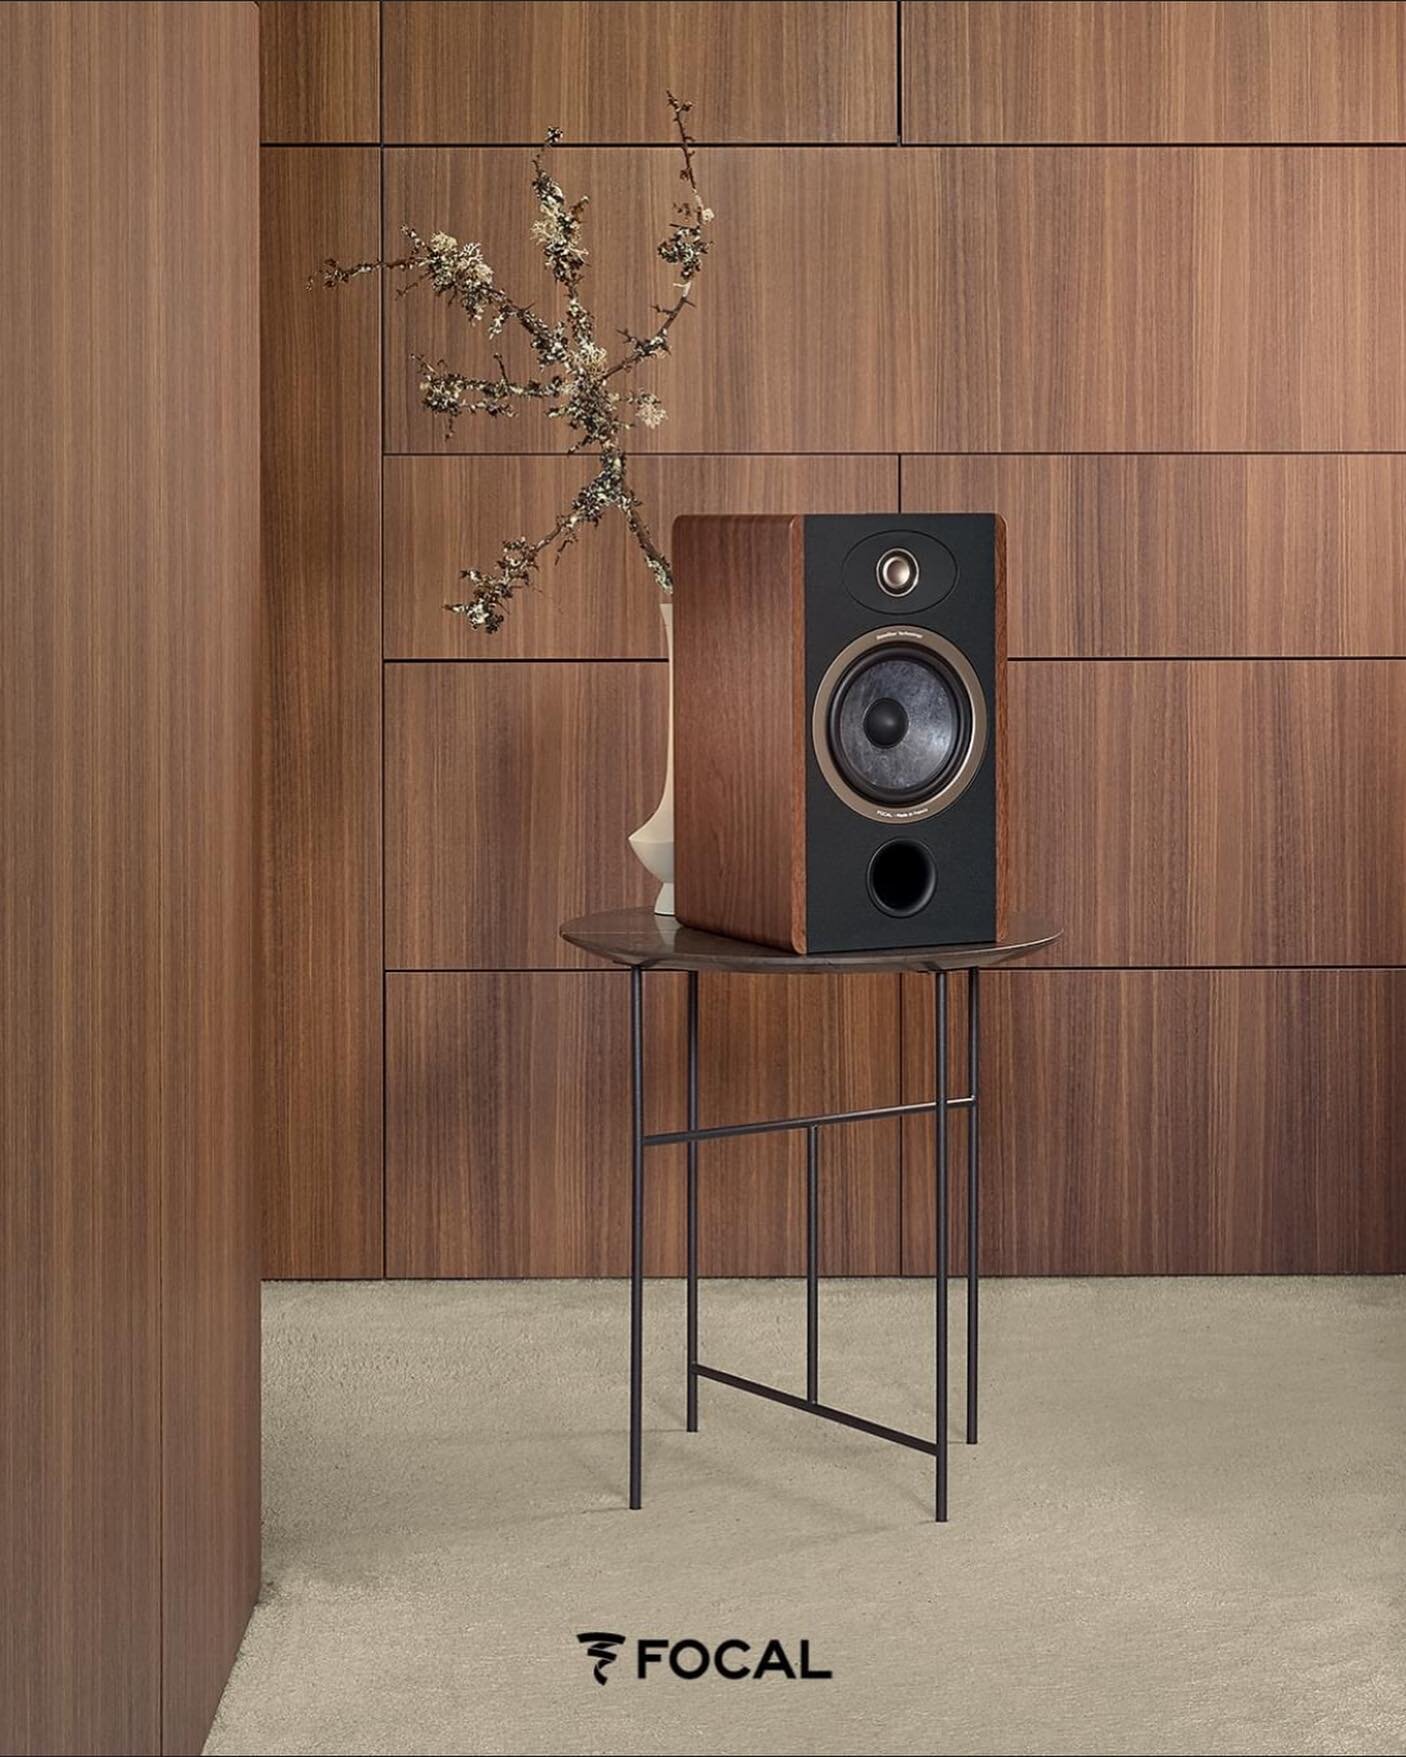 Focal introduces their new line of loudspeakers: Vestia. The five new models delivere the purity of Focal sound, made even finer thanks to a host of sound details.